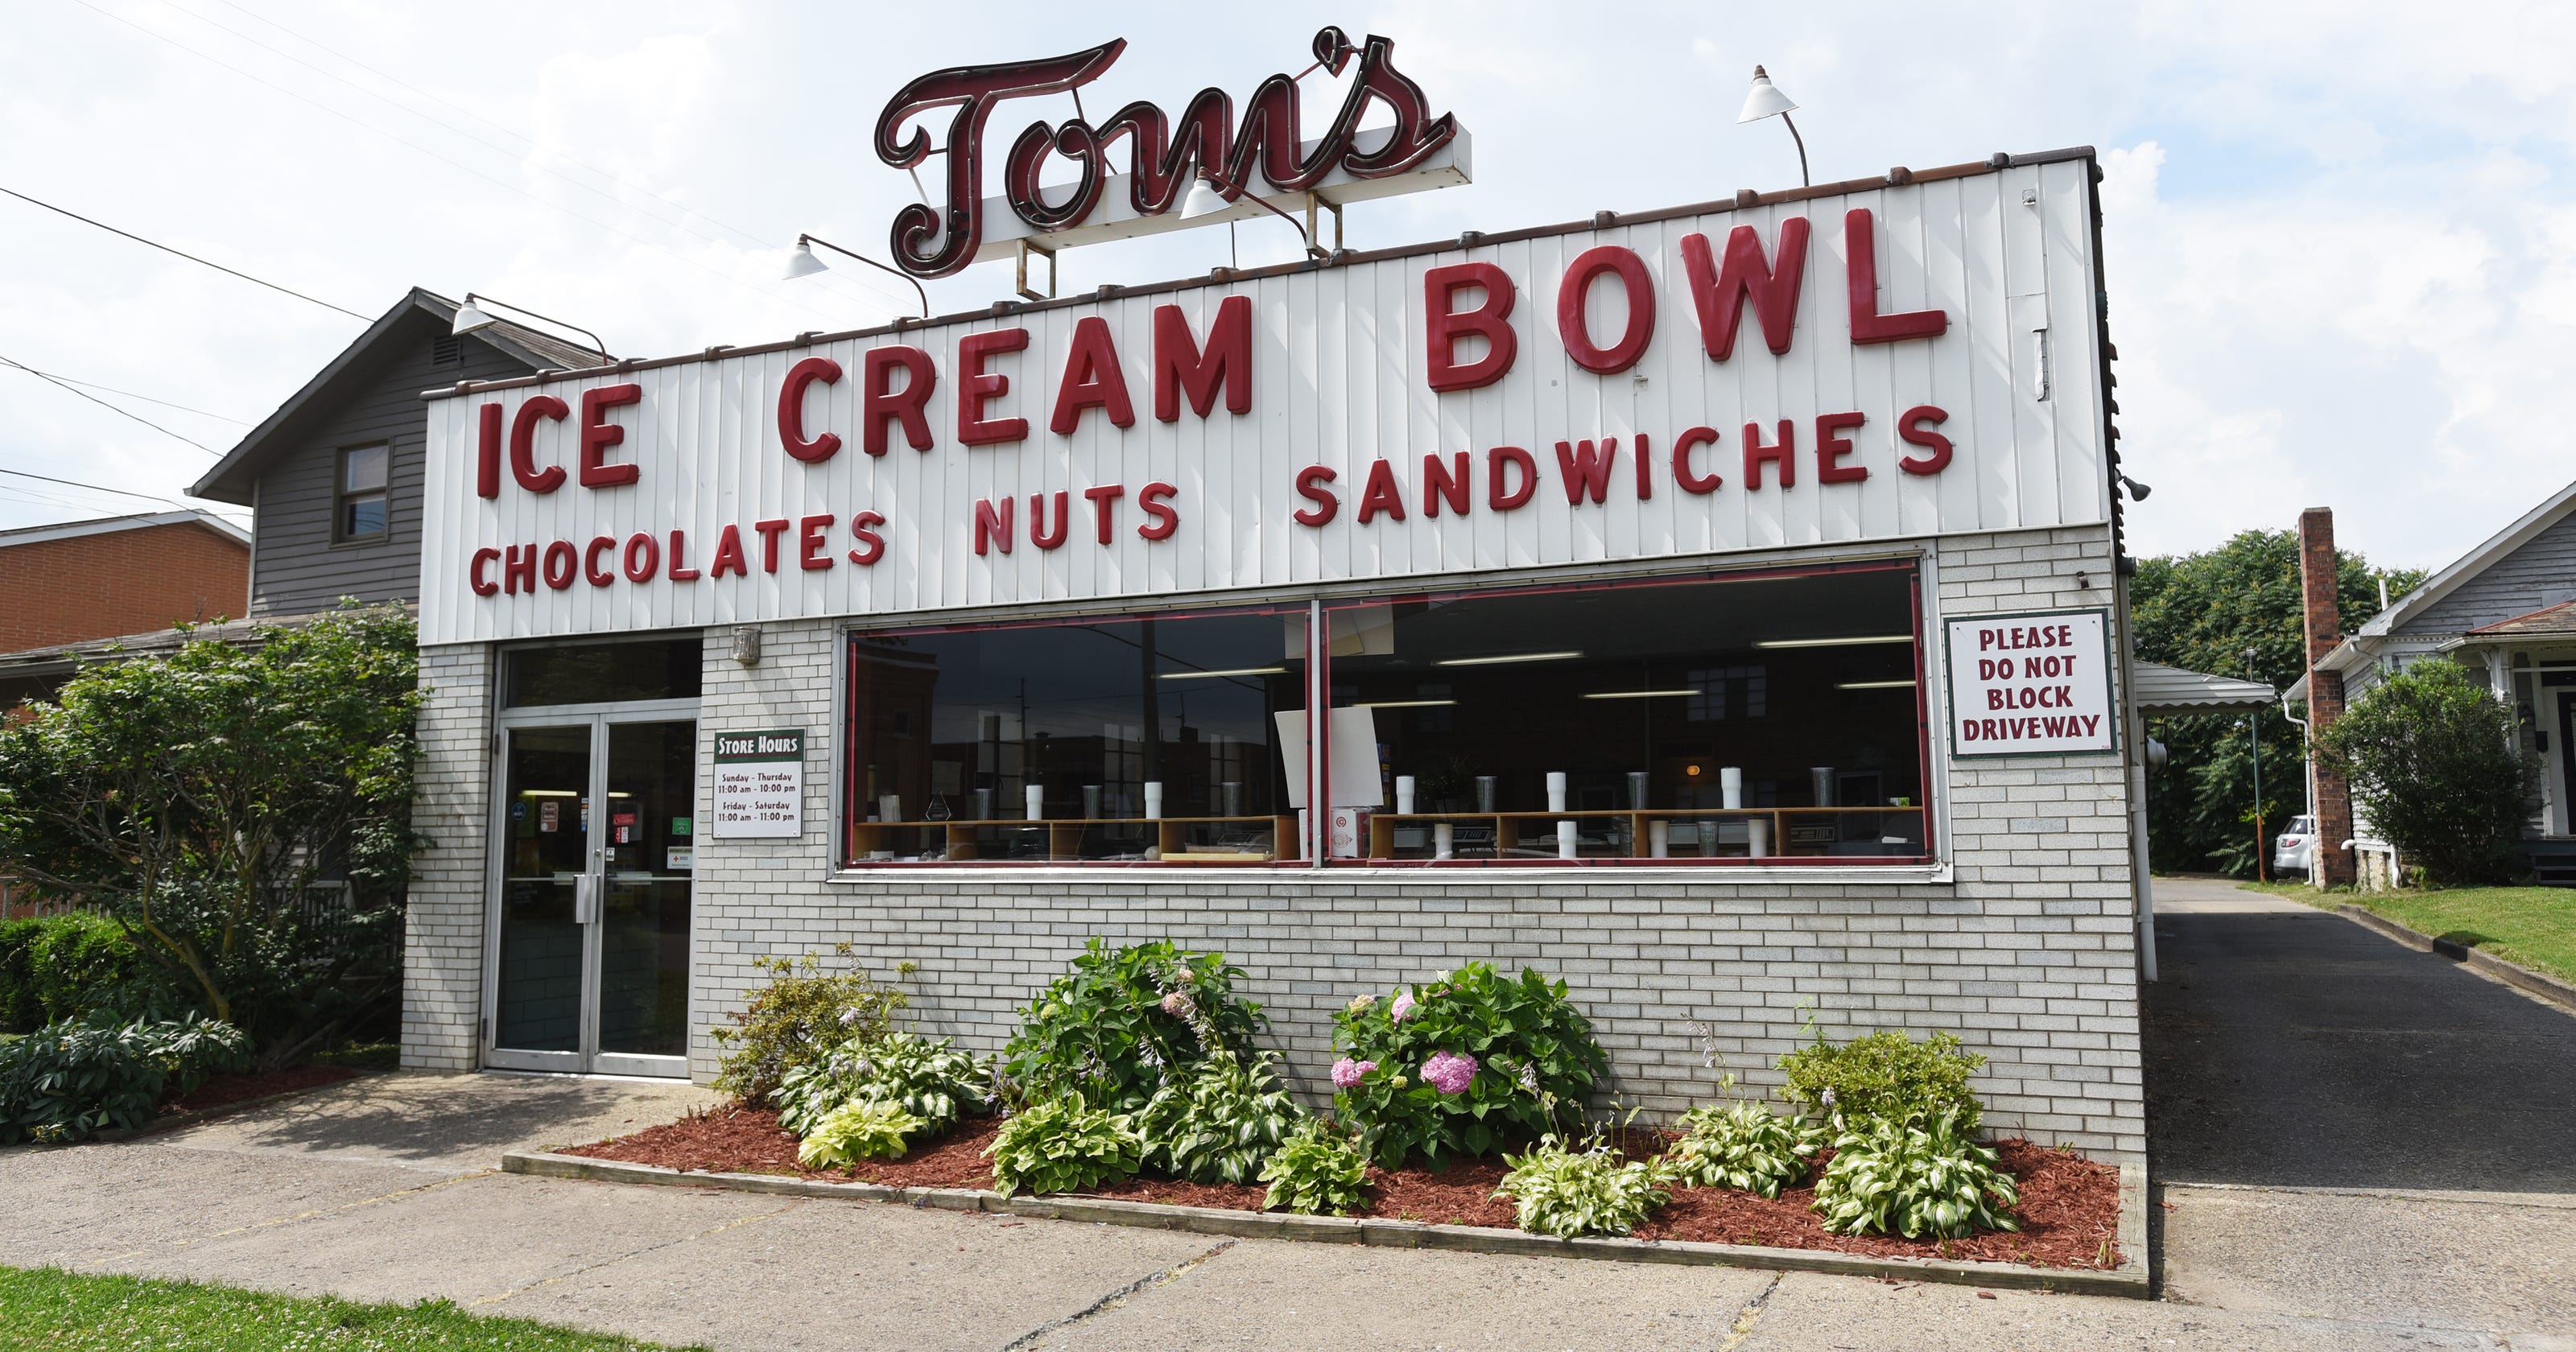 Food Network to film at Tom's Ice Cream Bowl Wednesday